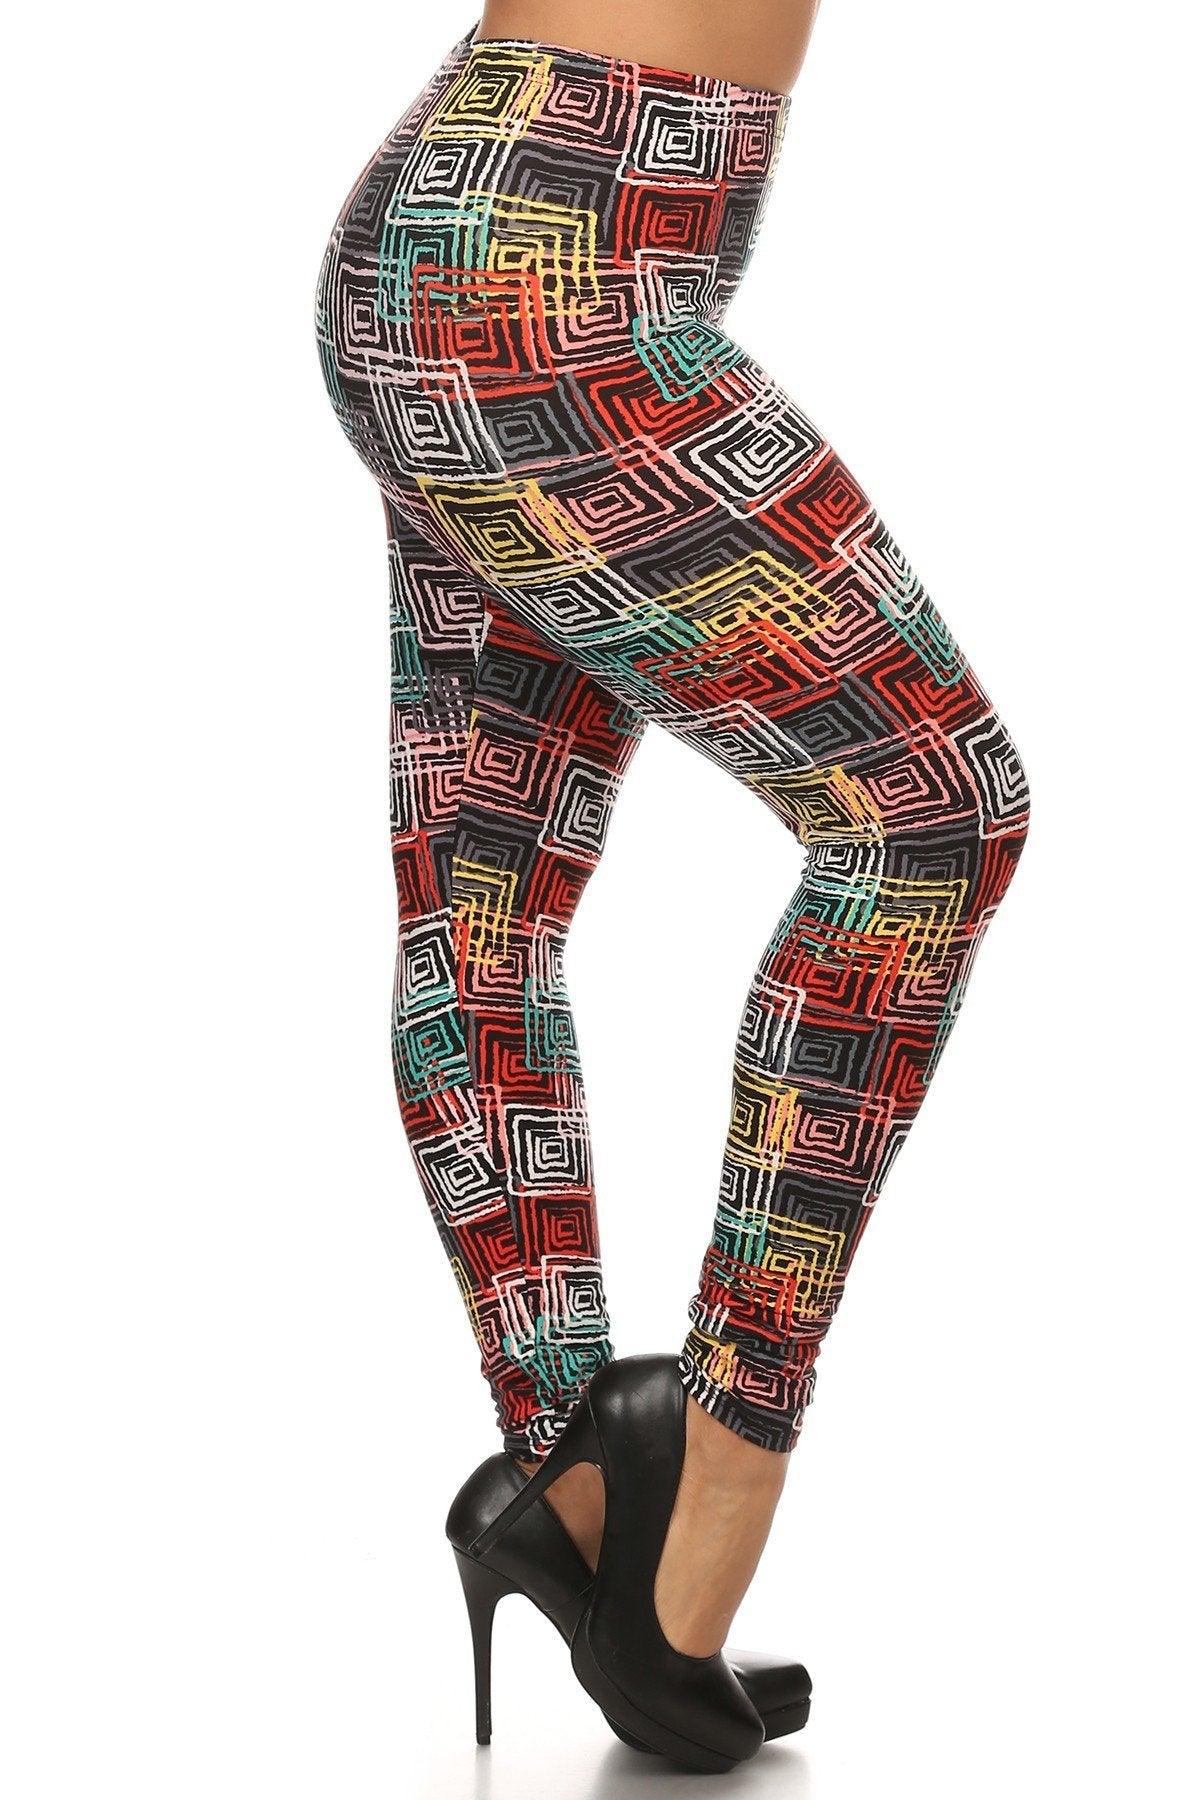 Abstract Geometric Printed Knit Legging With Elastic Waistband, And High Waist Fit - Kreative Passions